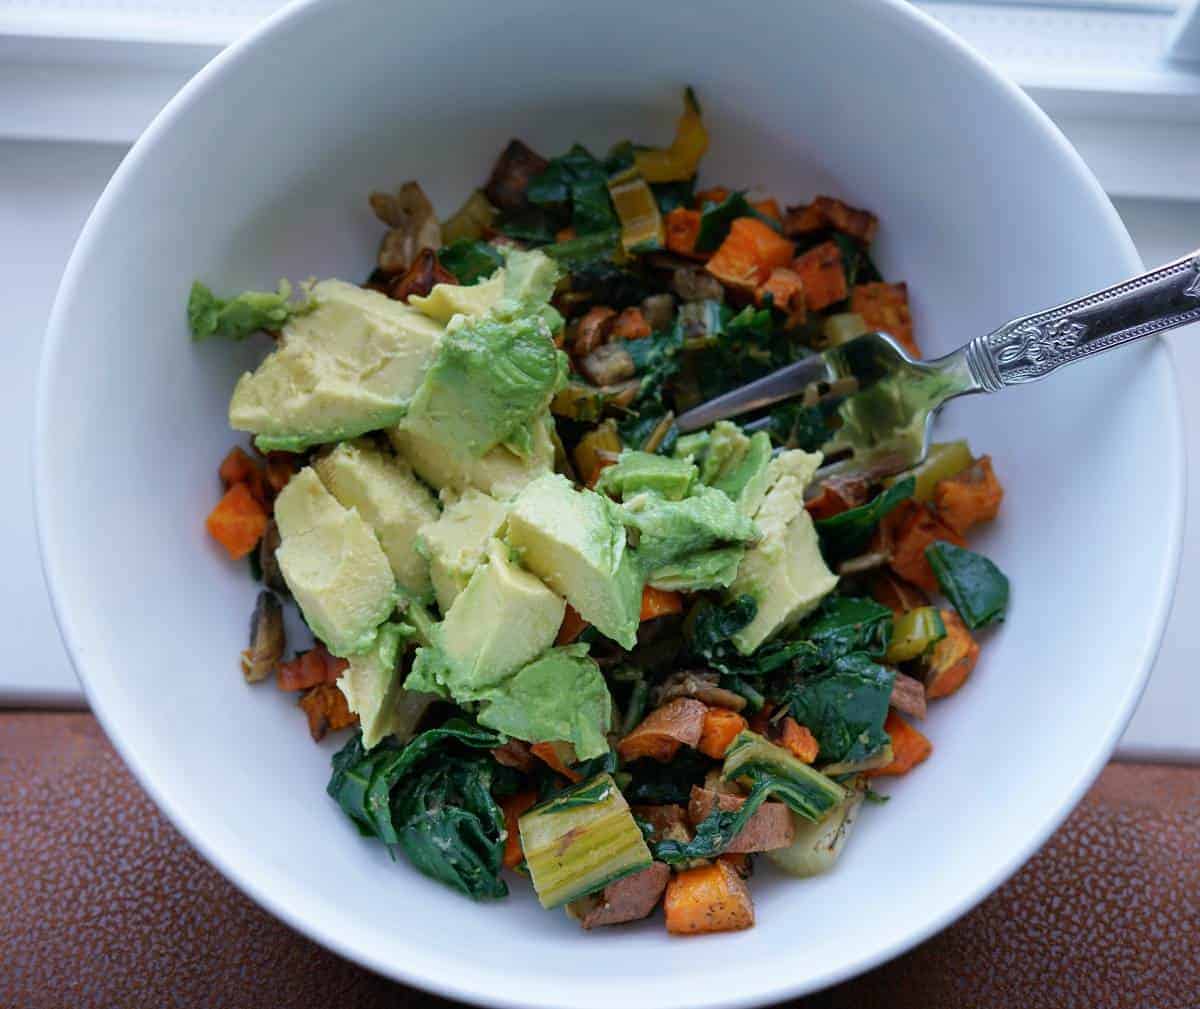 Rainbow chard, sweet potatoes, and mushrooms in a white bowl with avocado on top.